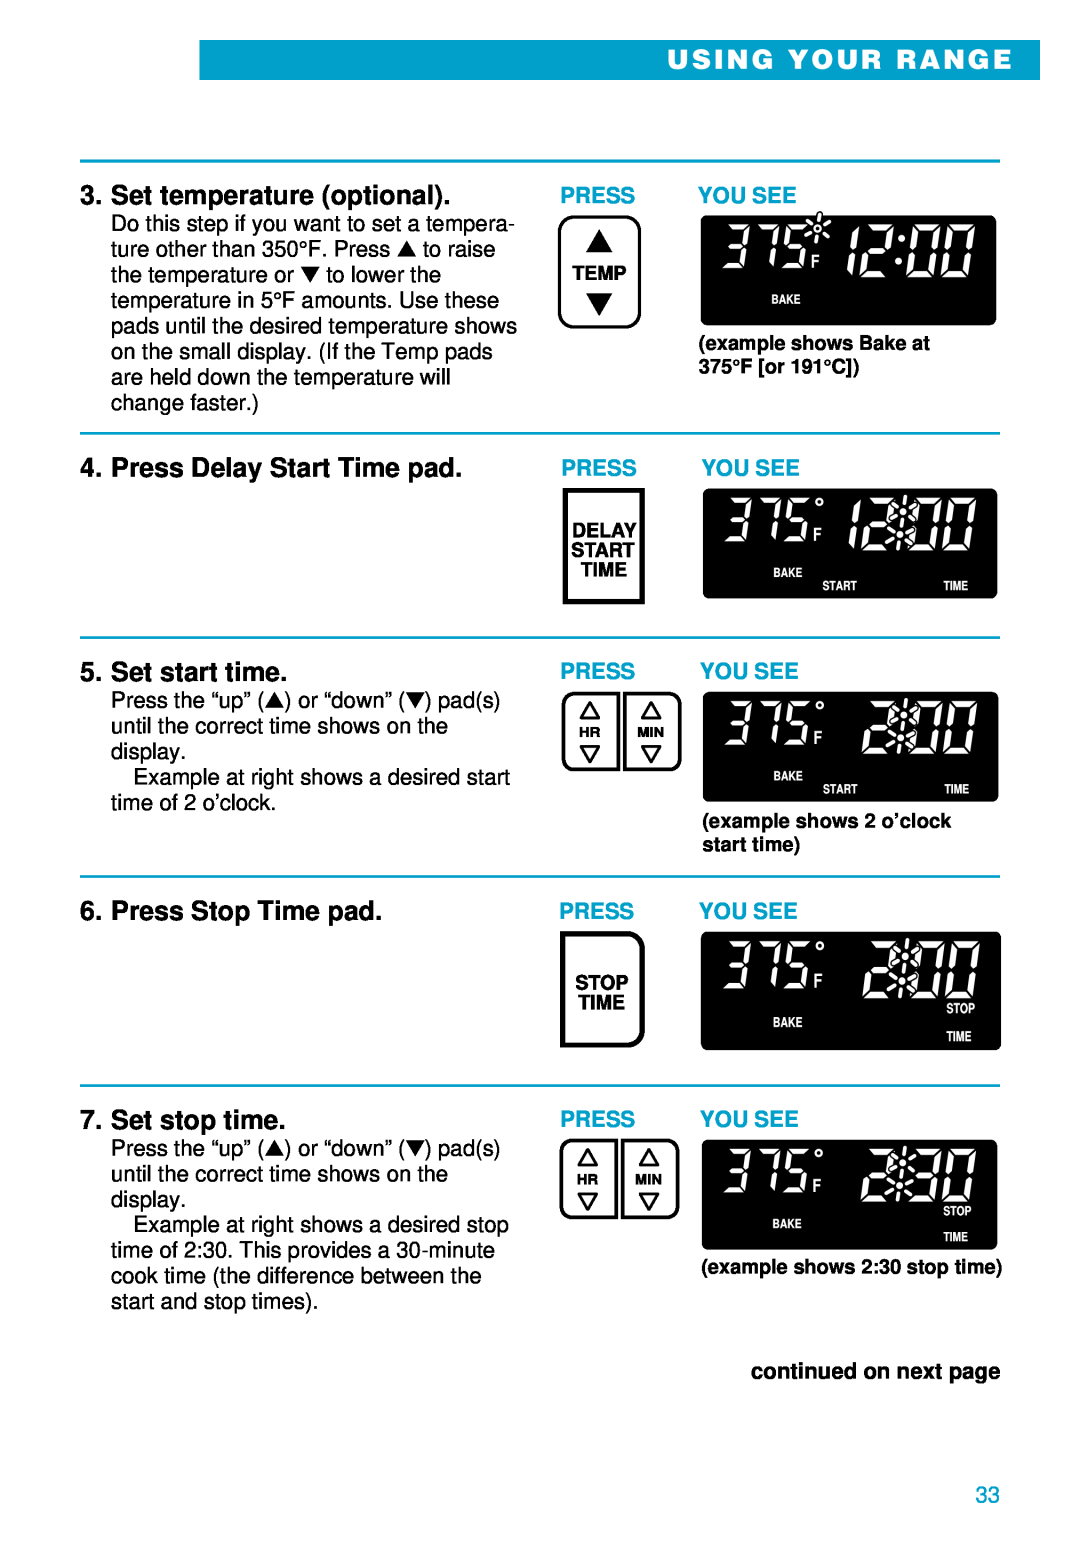 Whirlpool RS696PXE Press Delay Start Time pad, Set start time, Press Stop Time pad, Set stop time, Using Your Range 